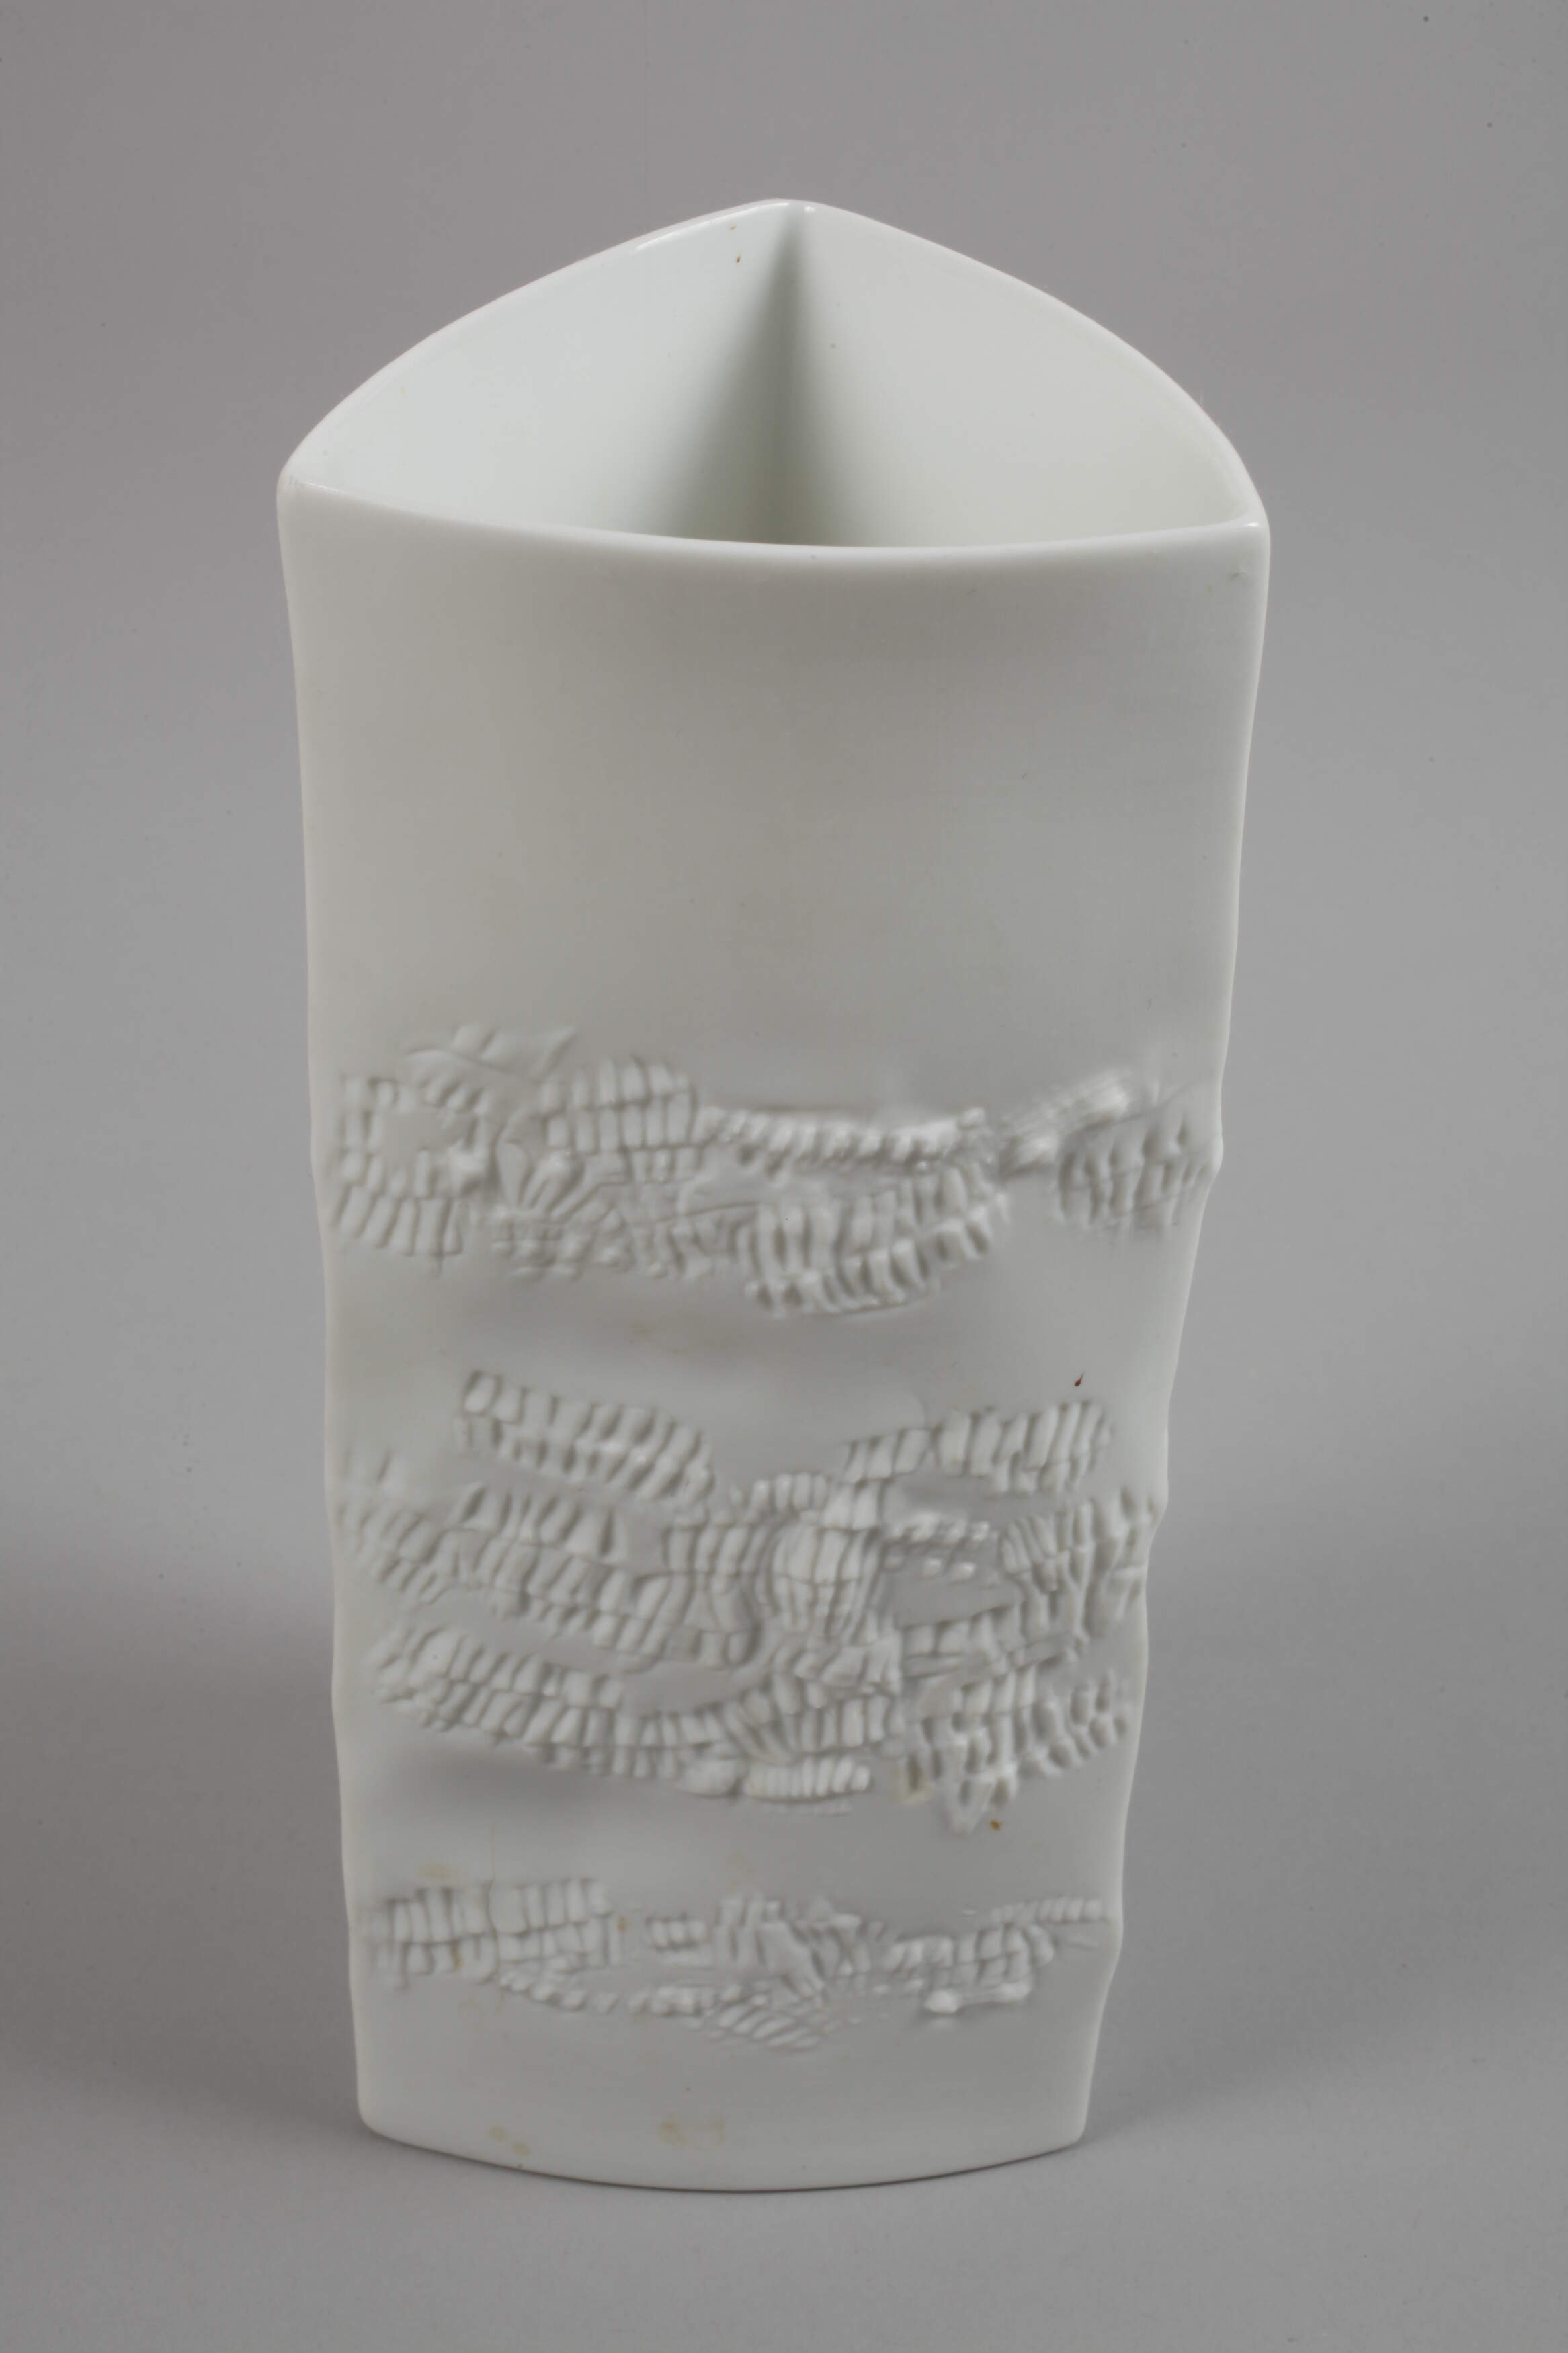 Convolute of decorative porcelain artist editions - Image 4 of 5